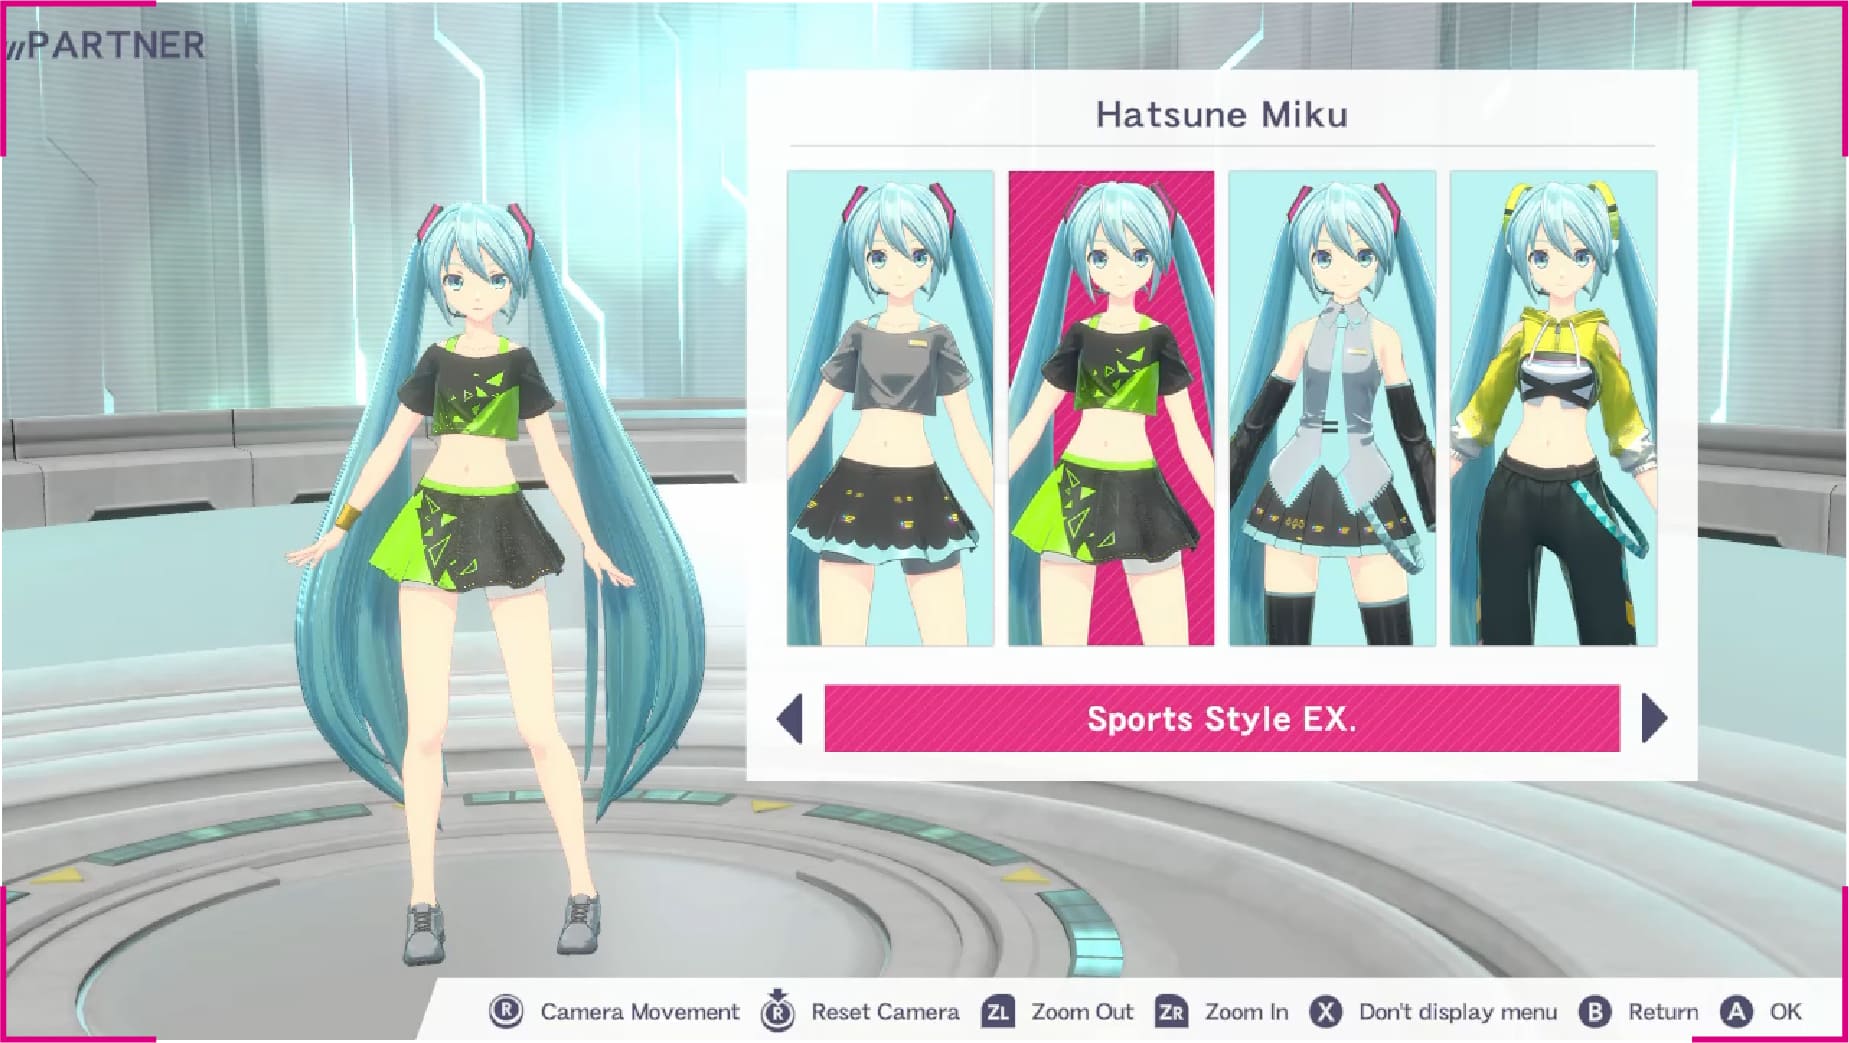 In the new "Miku Exercise" mode, you can box along to all your favorite Piapro Characters' hits!